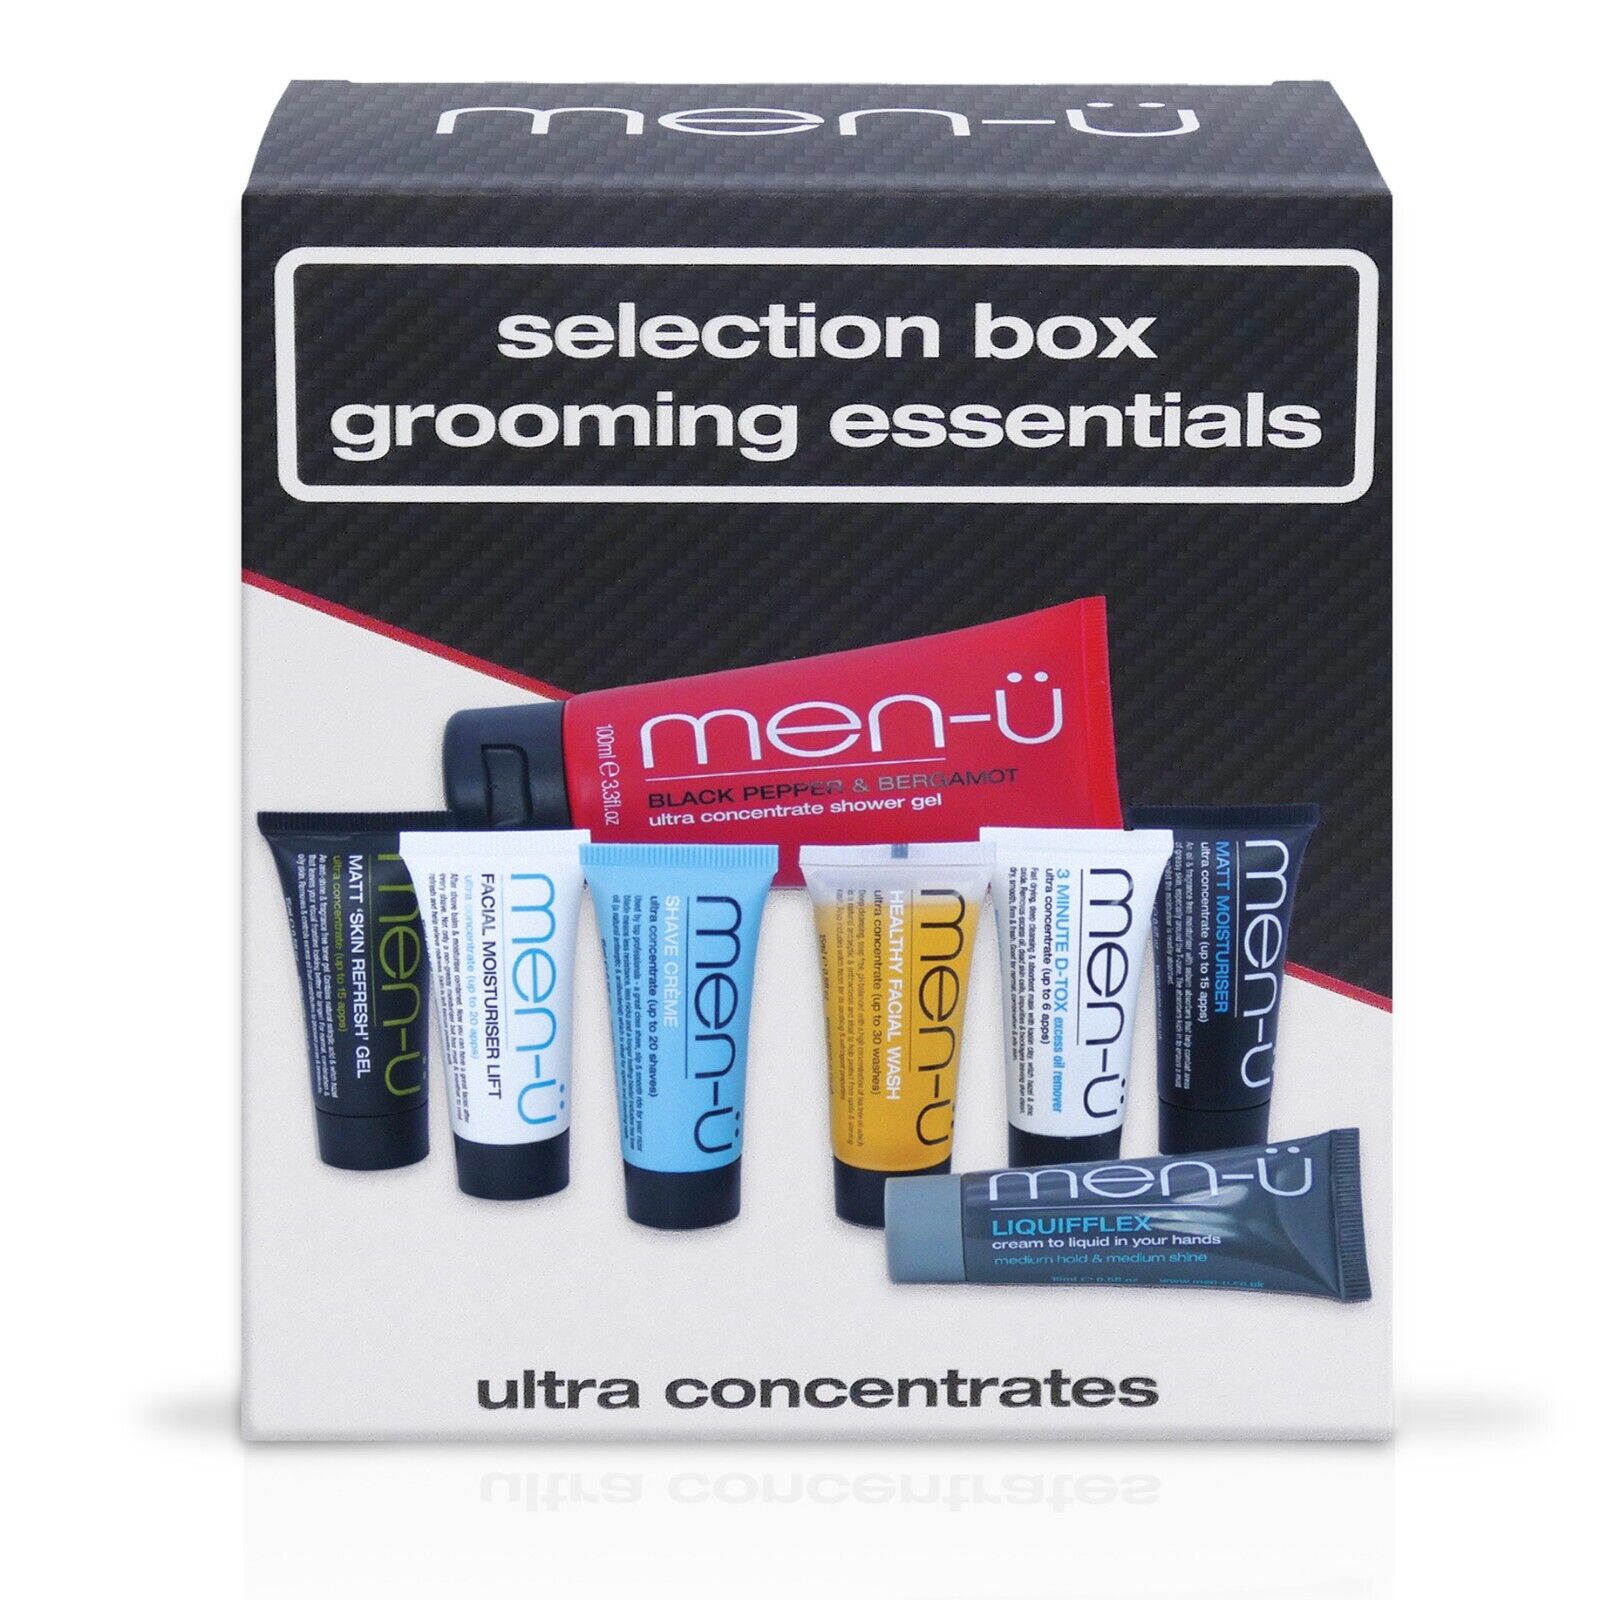 Men-u Grooming Gift Set: Shave and Care Concentrate